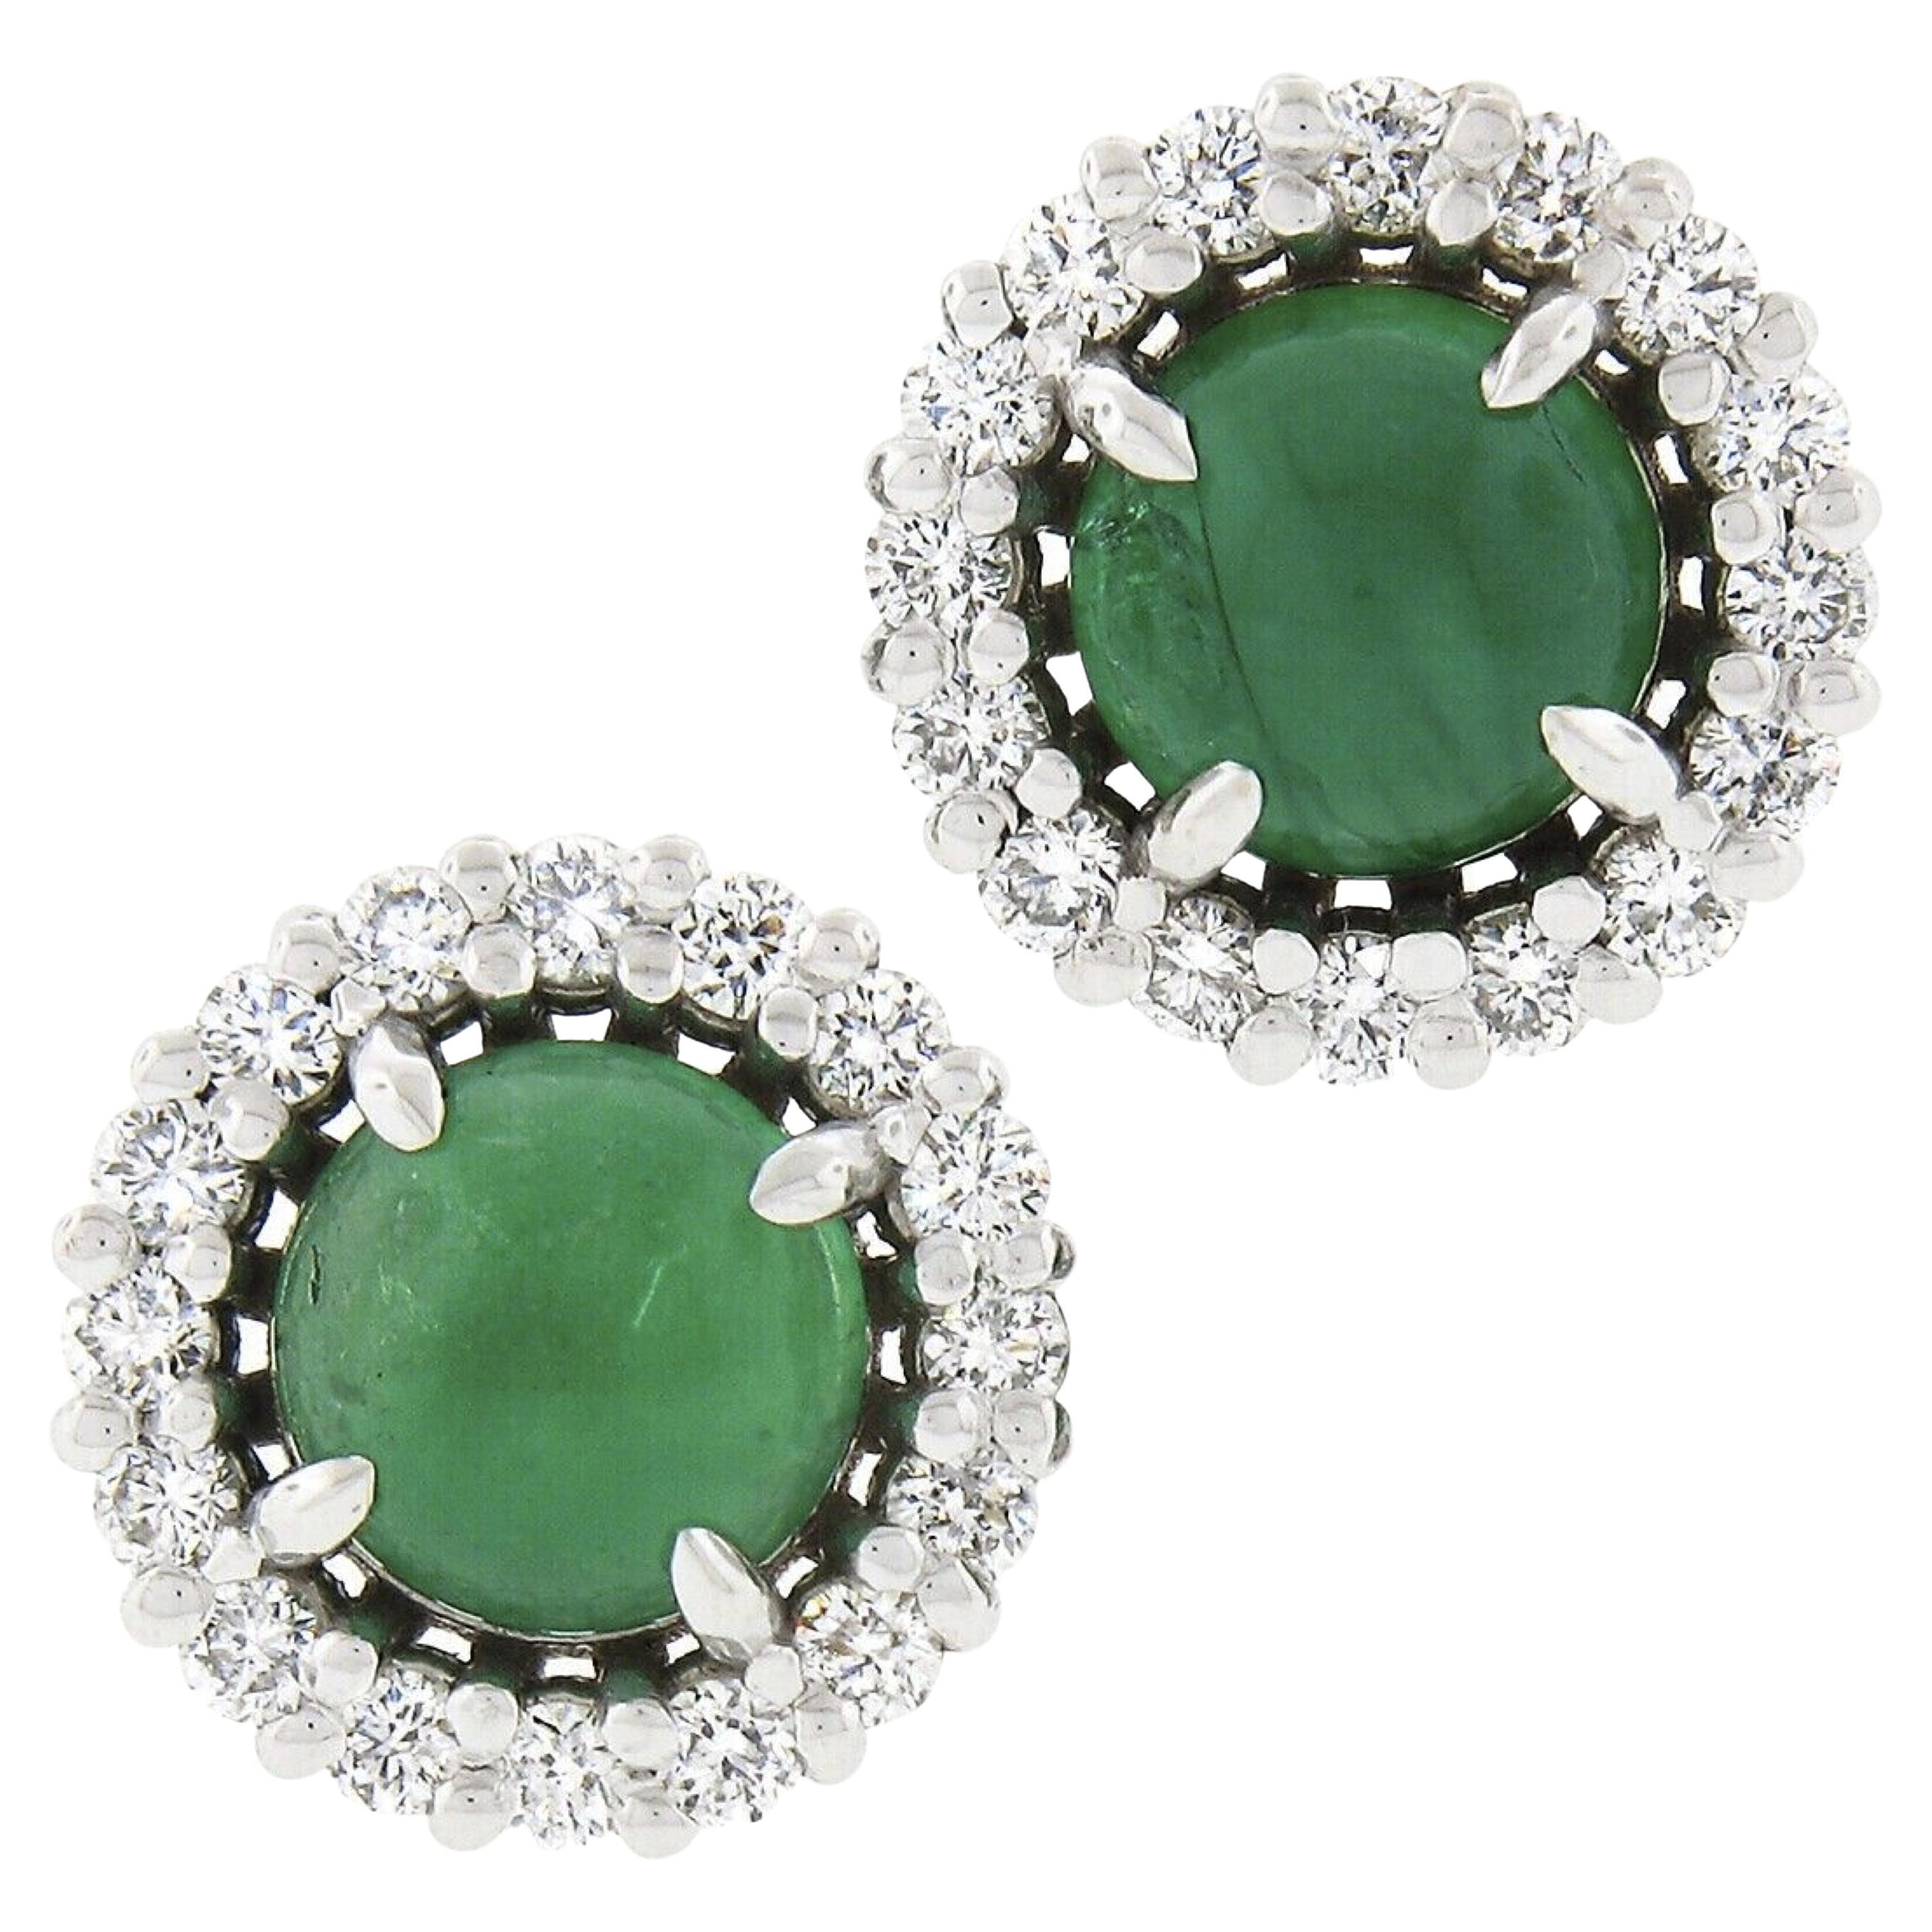 New 18k White Gold 1.72ctw Round Cabochon Emerald w/ Diamond Halo Stud Earrings For Sale